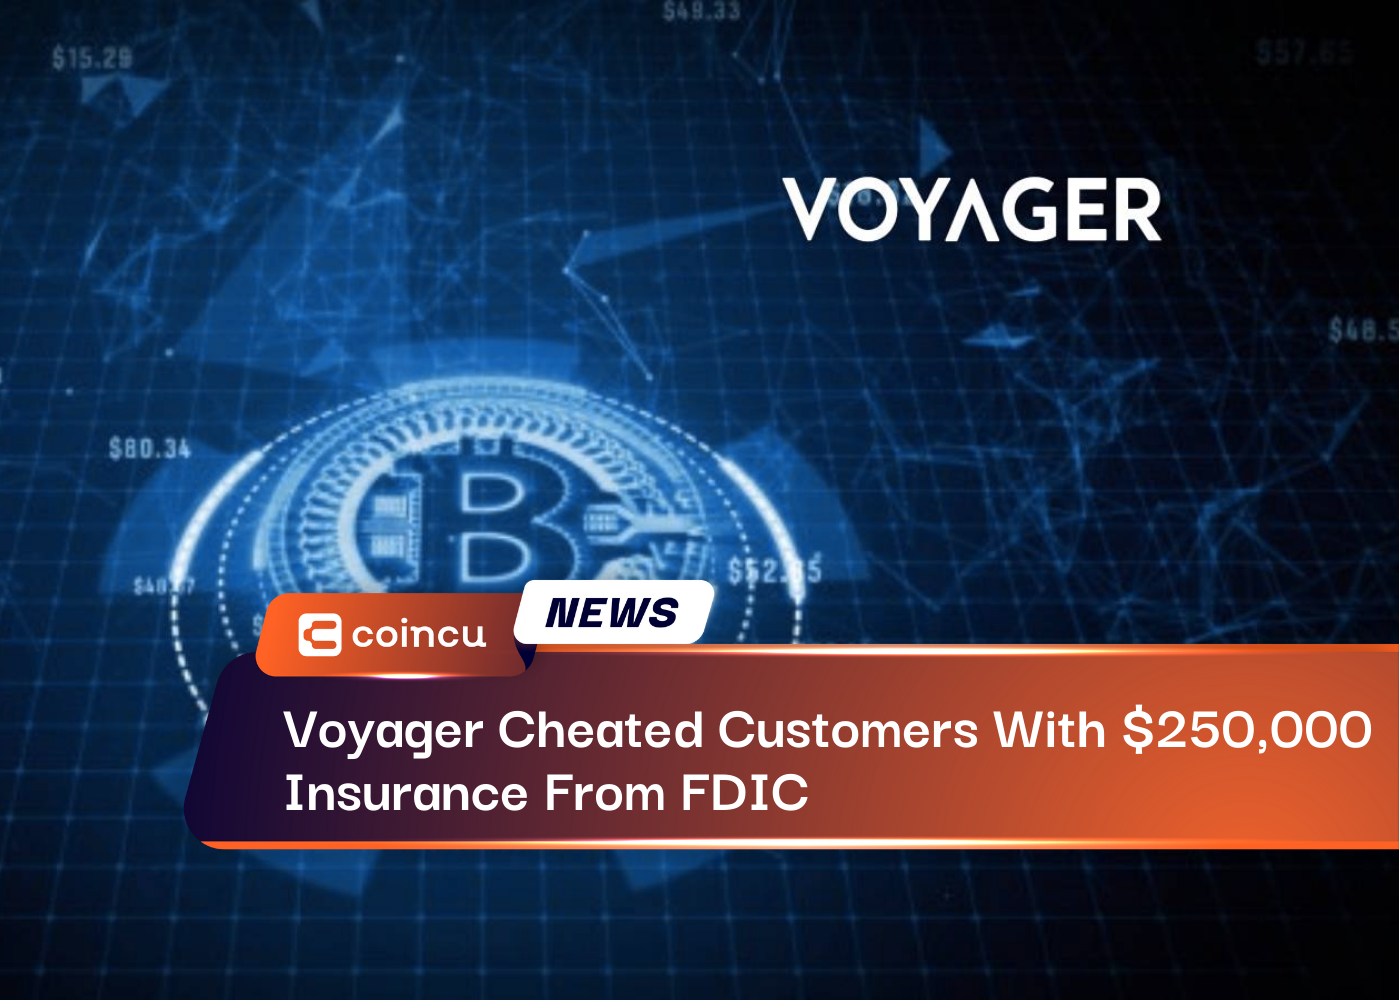 Voyager Cheated Customers With $250,000 Insurance From FDIC